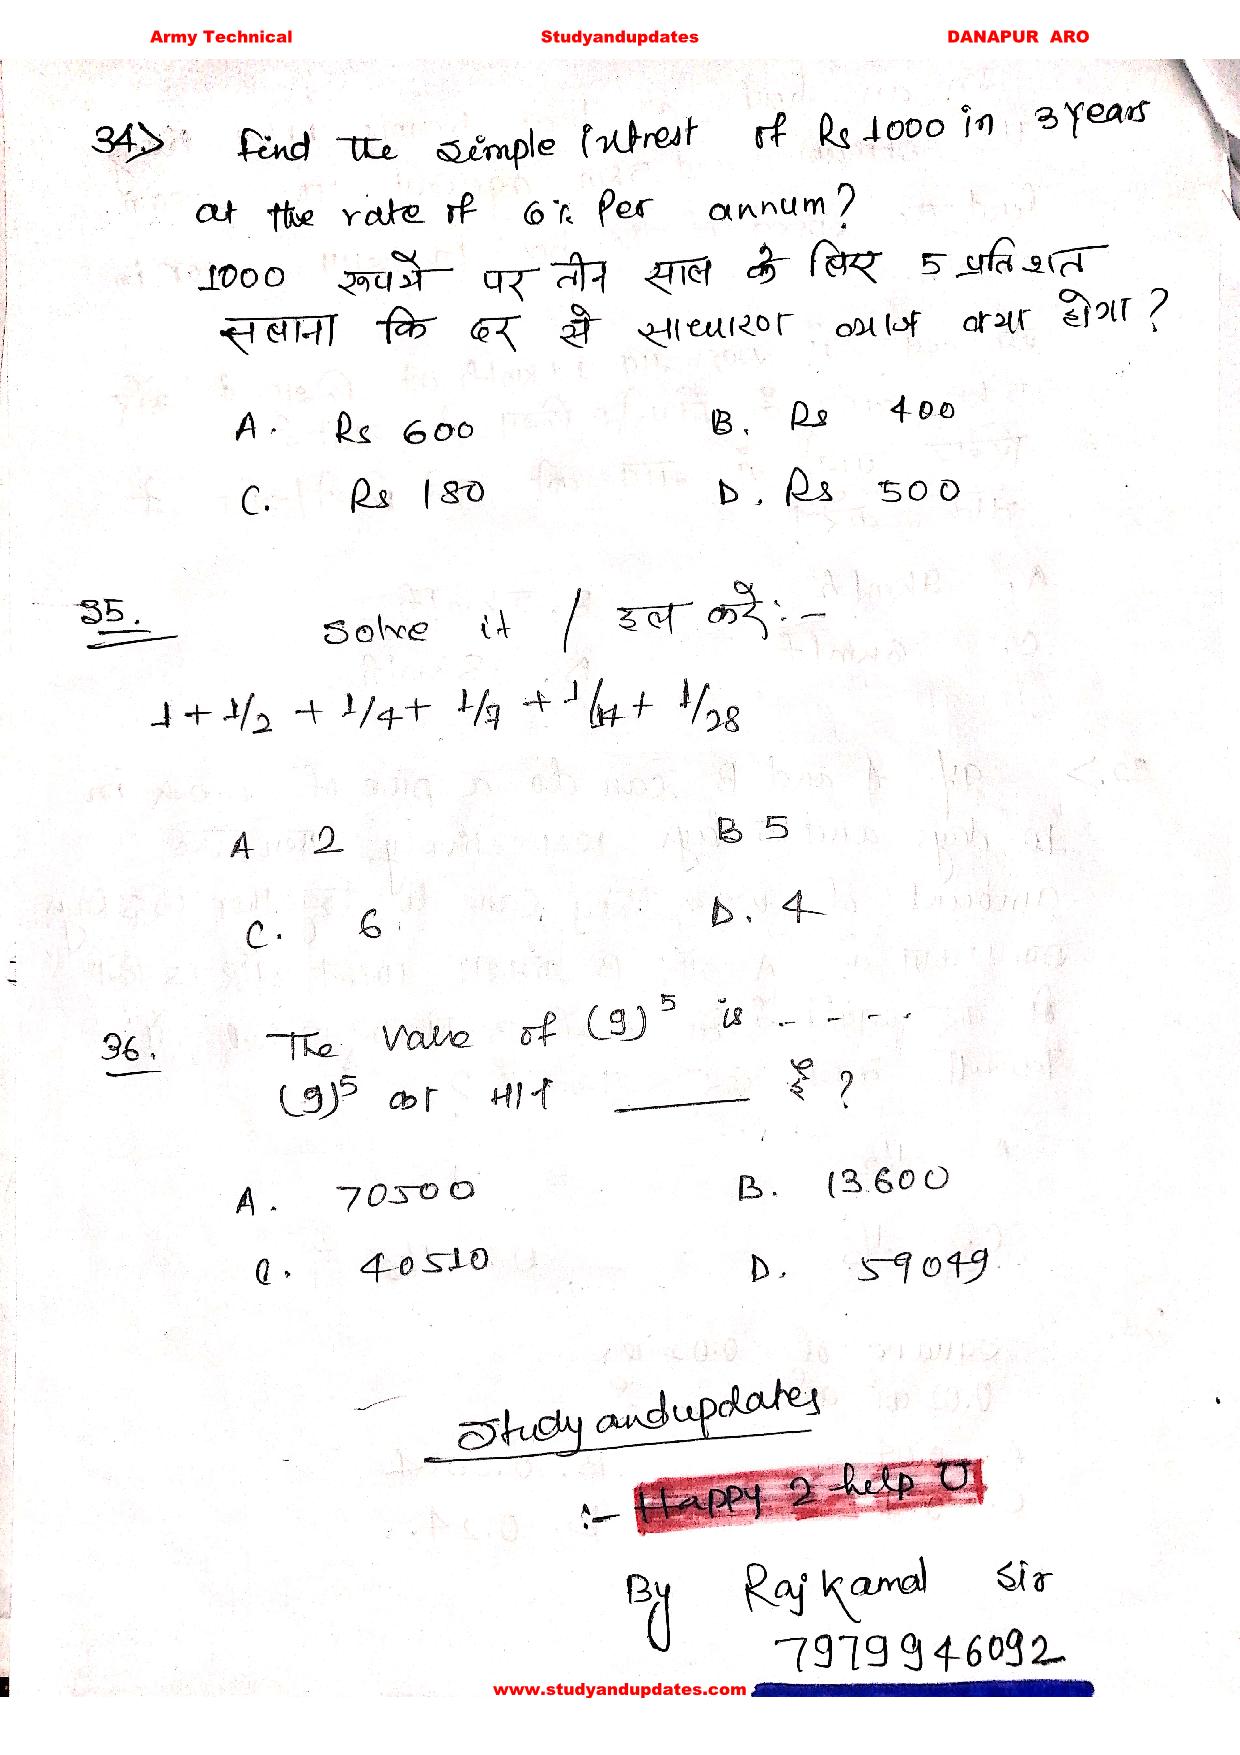 Indian army technical previous year question paper- Nov 2020 Danapur ARO